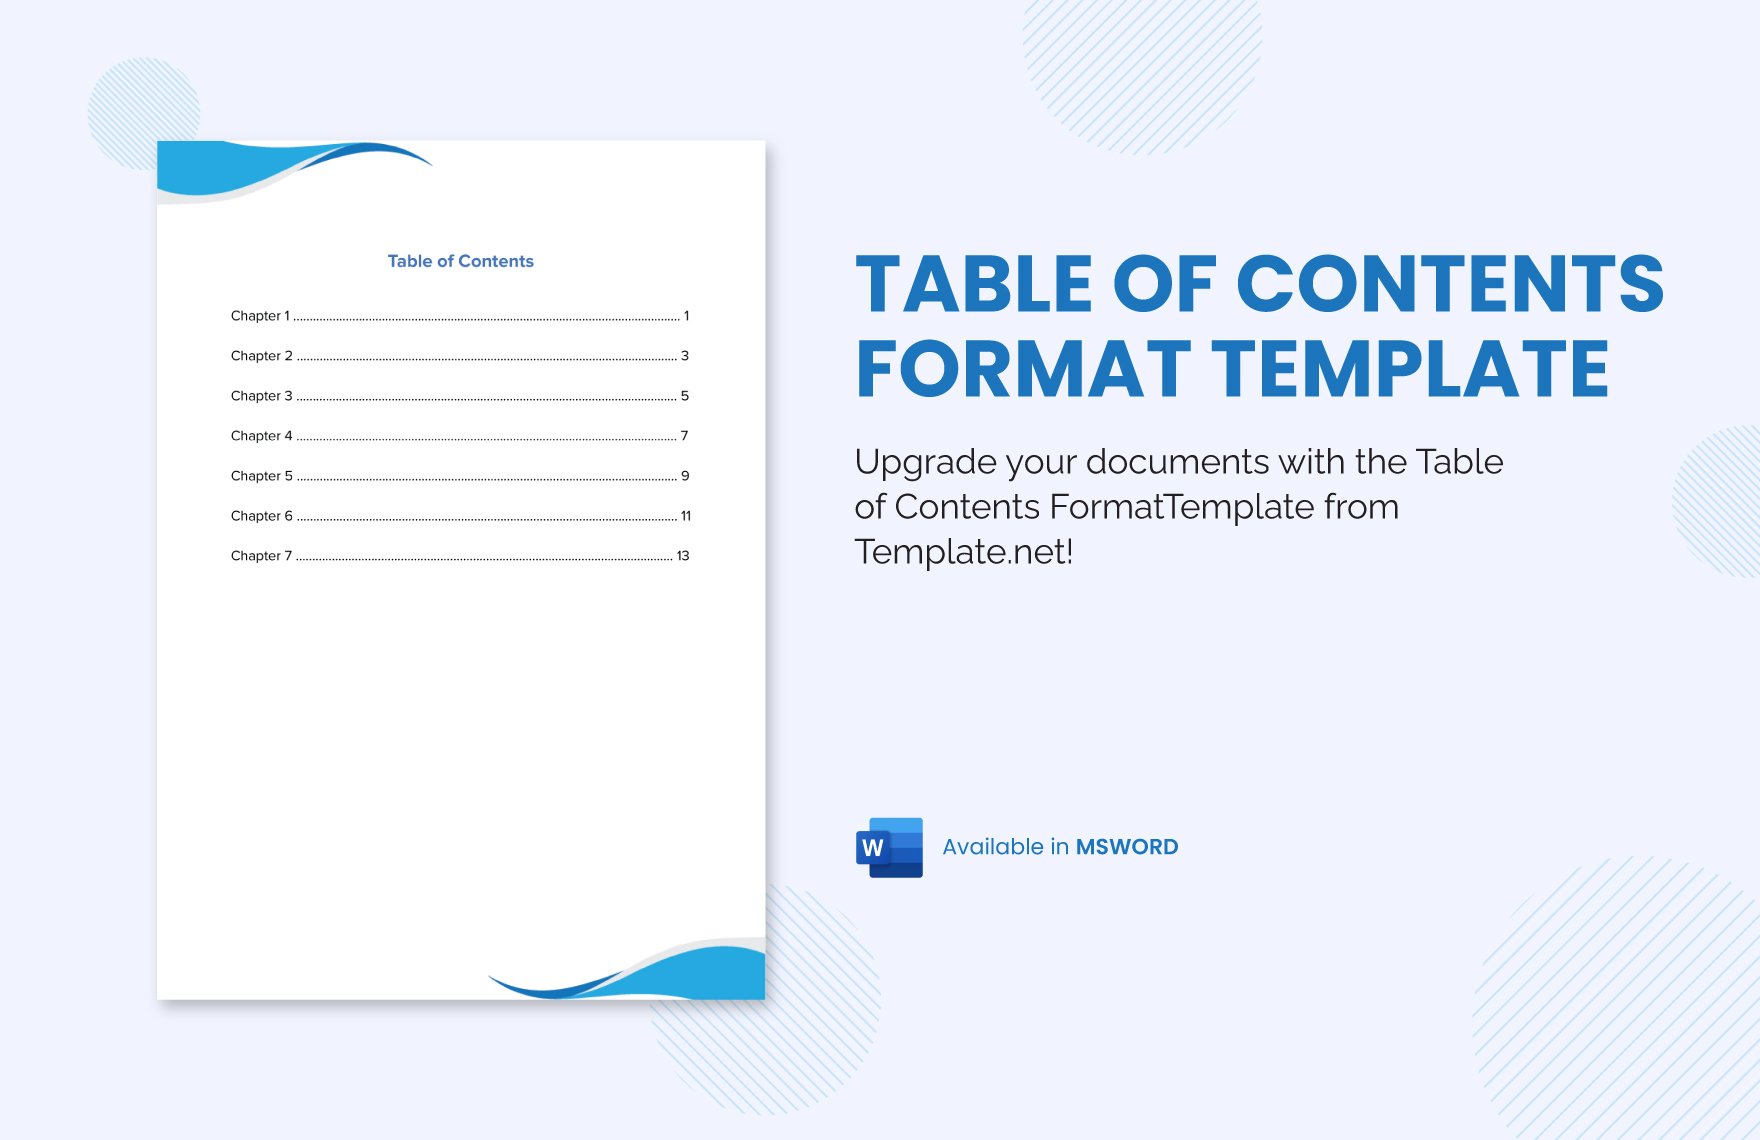 Table of Contents Format Template